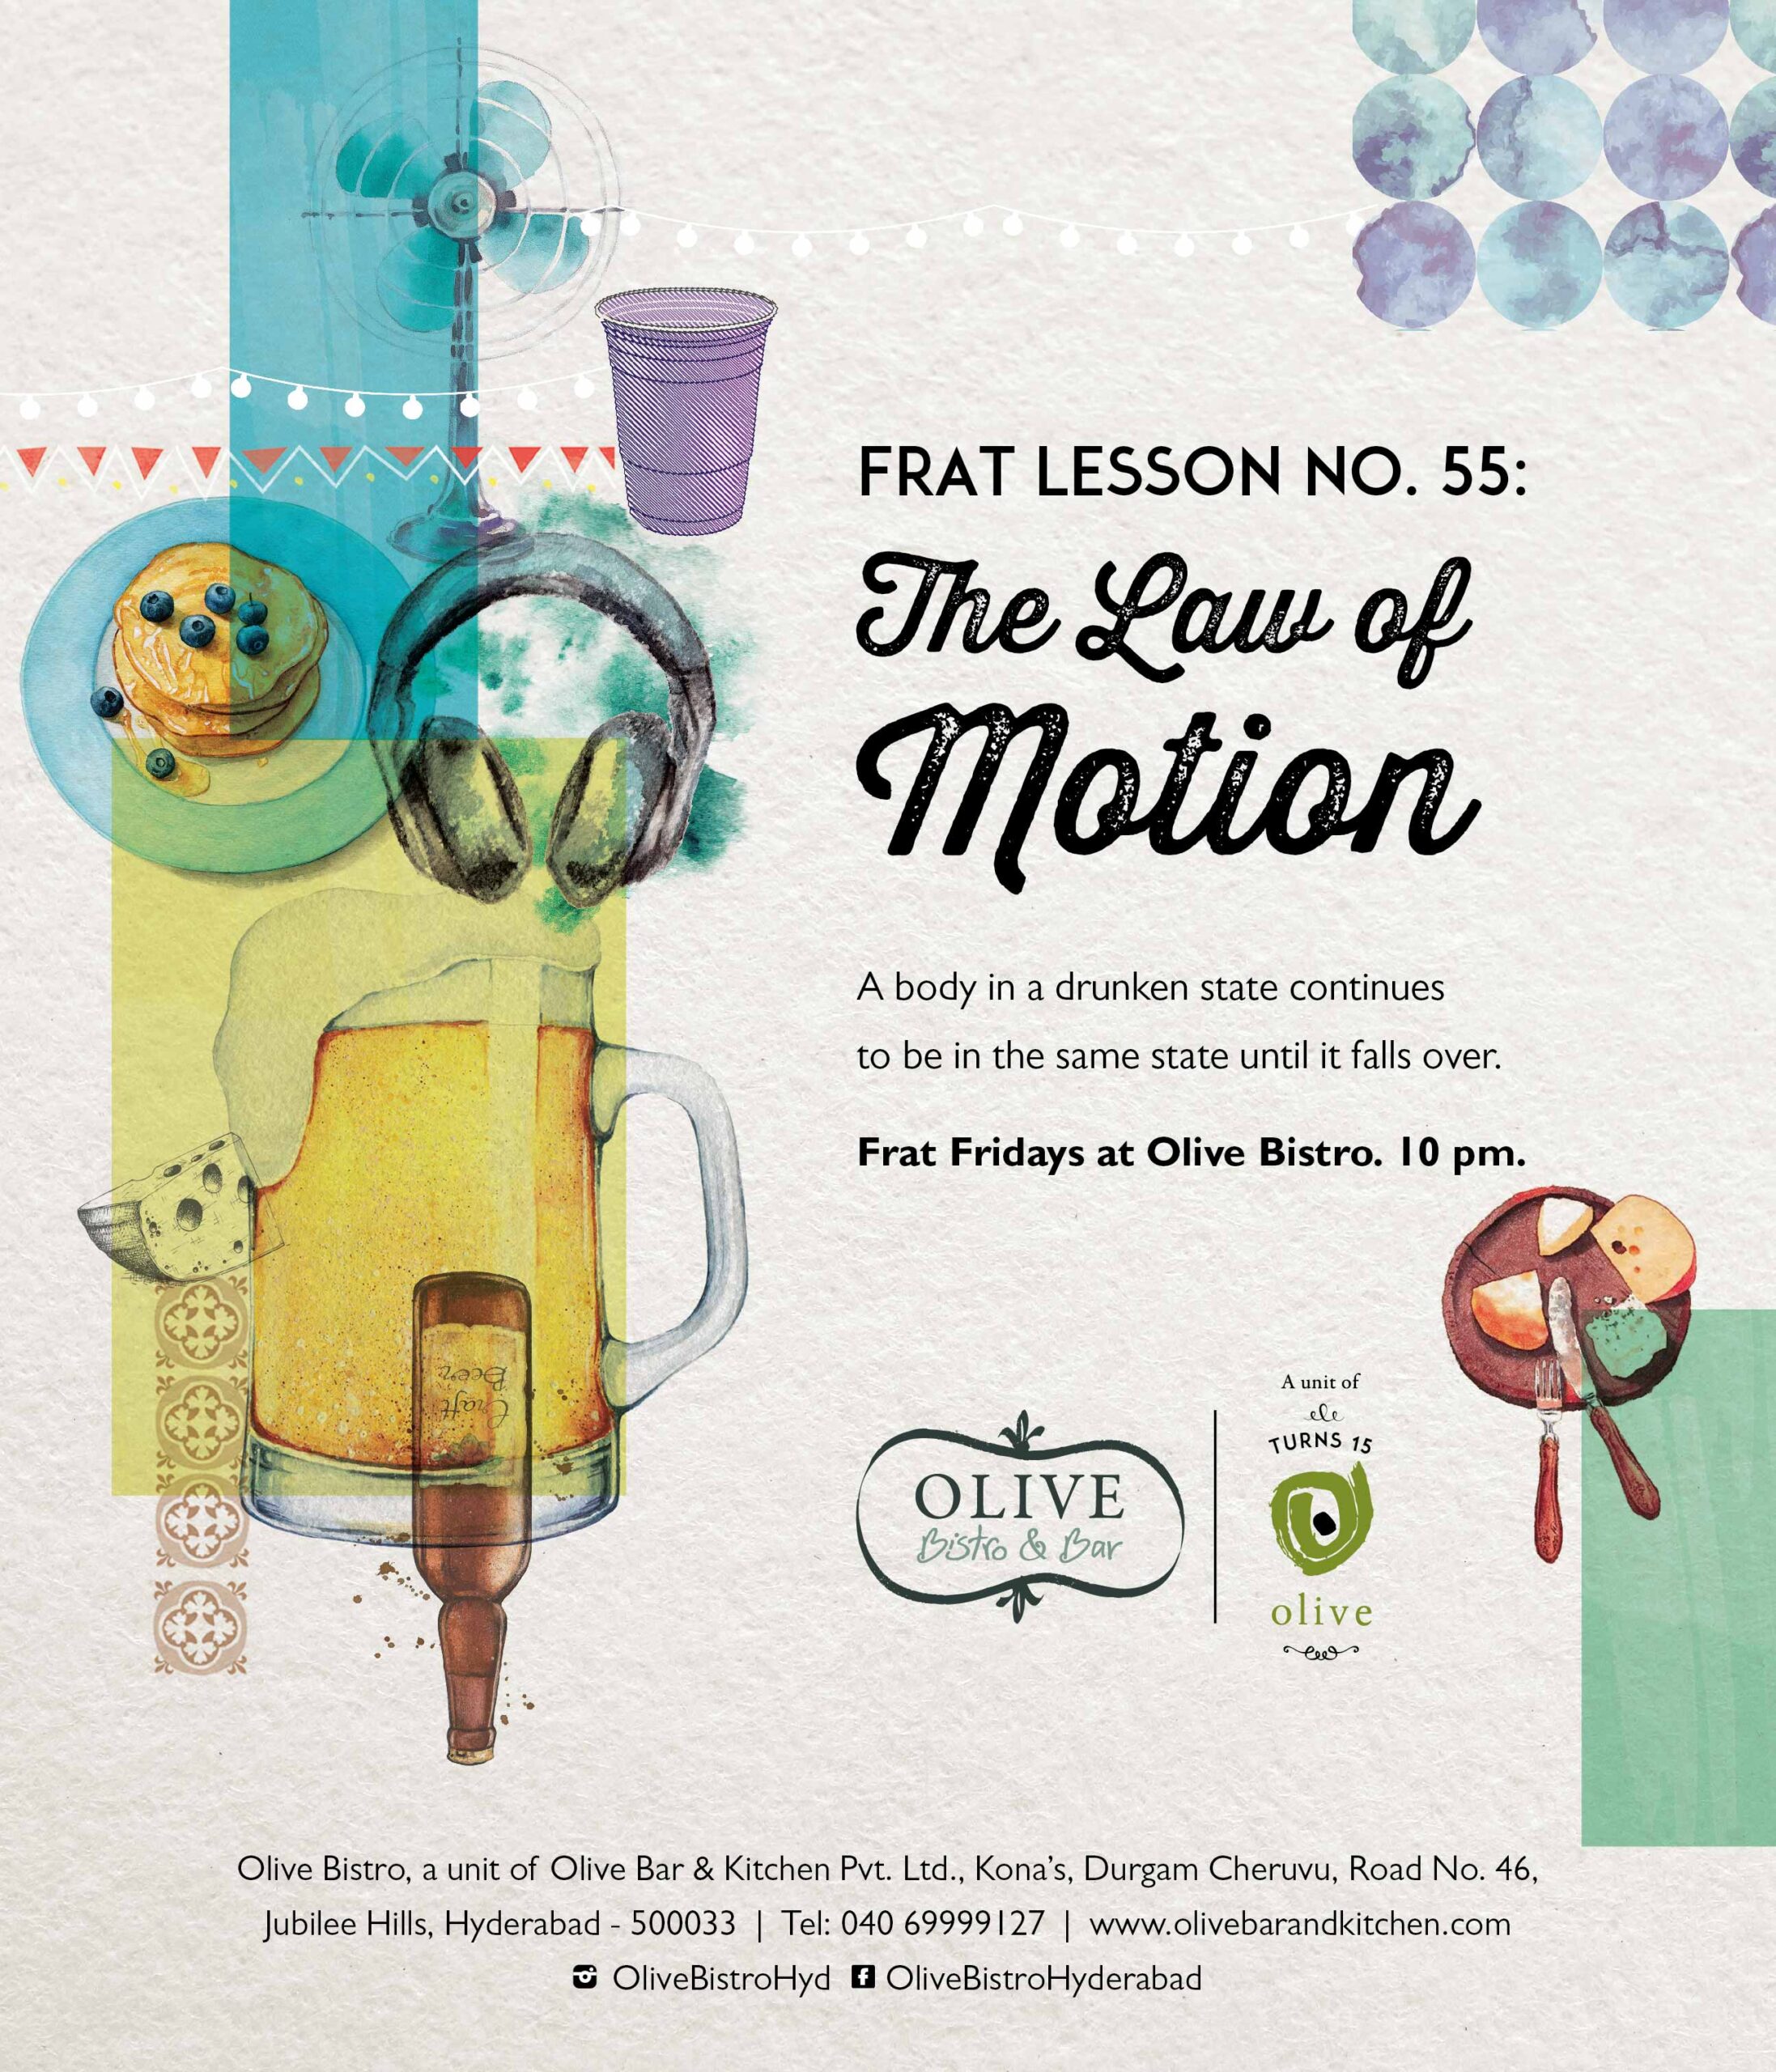 This poster for Frat Fridays at Olive Bistro, Hyderabad shows the laws of motion change when alcohol is involved.